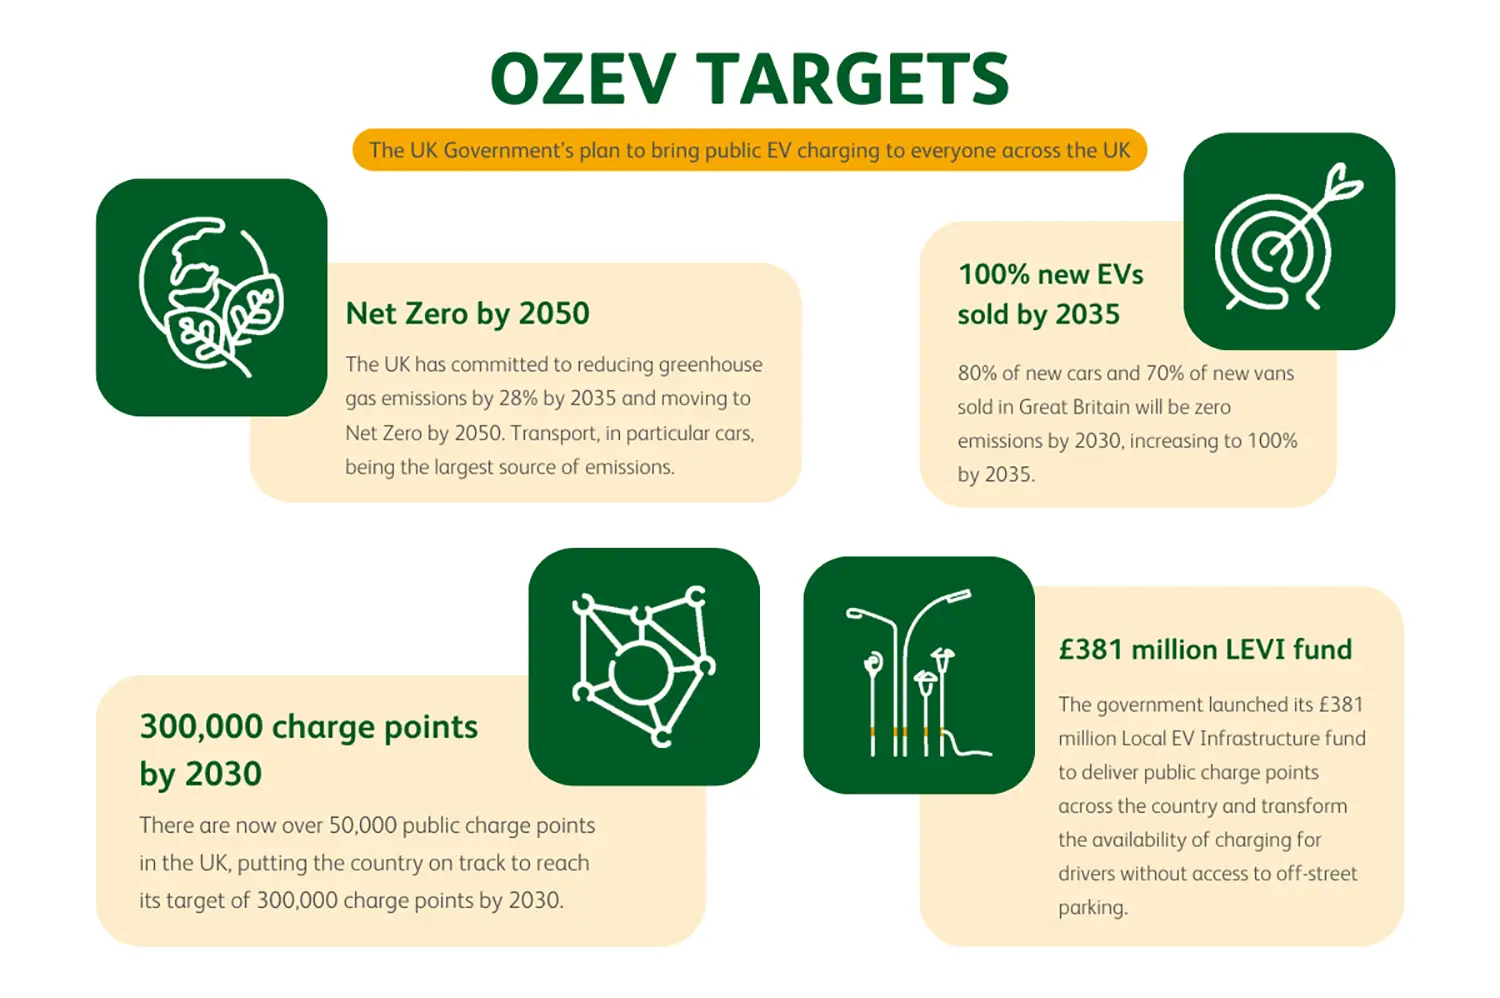 Infographic listing the OZEV targets from the UK government to reach Net Zero by 2050 and encourage the switch to EVs.